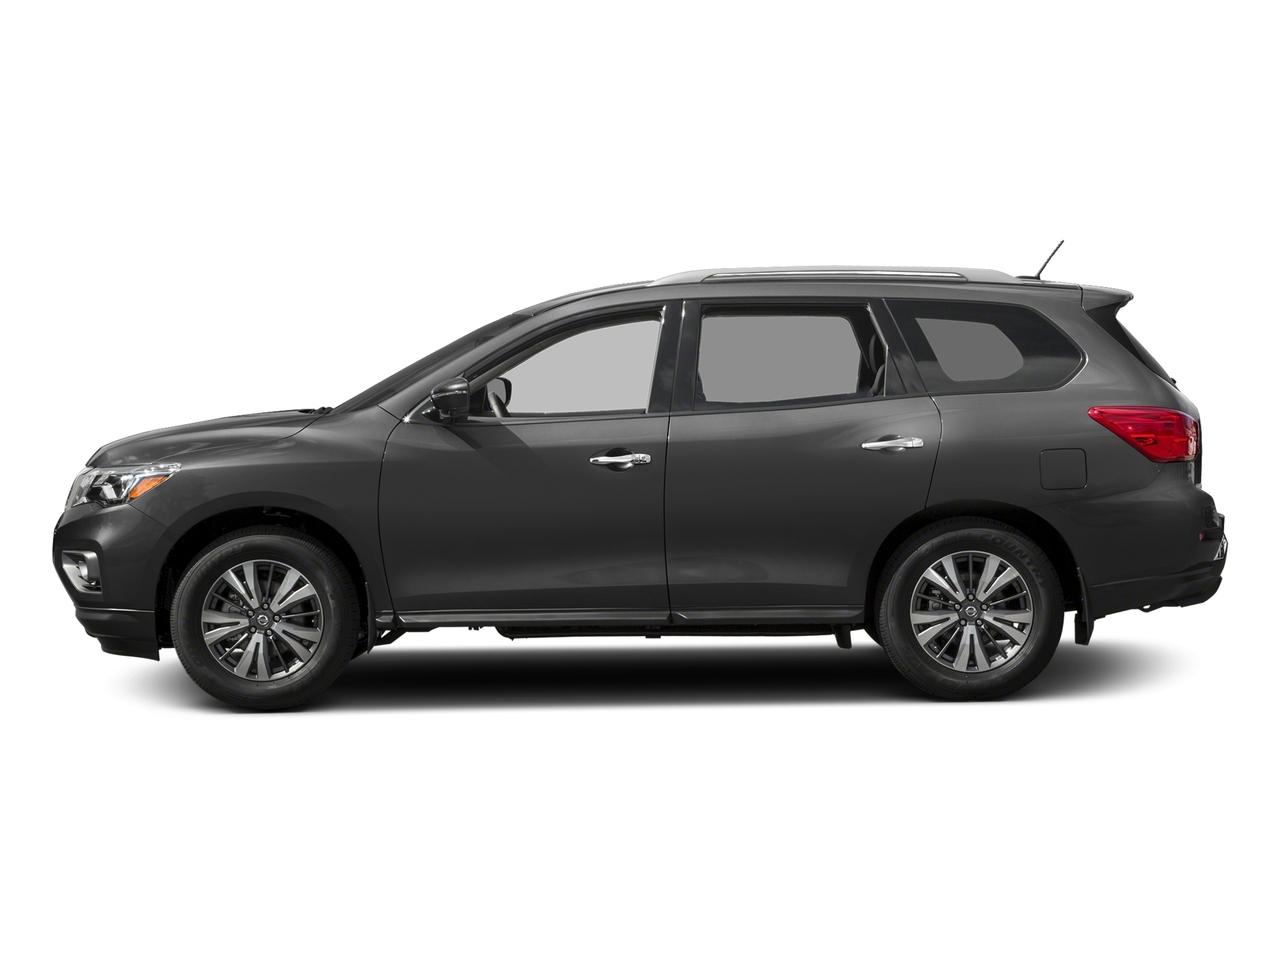 Used 2018 Nissan Pathfinder SL with VIN 5N1DR2MM1JC624238 for sale in Feasterville, PA